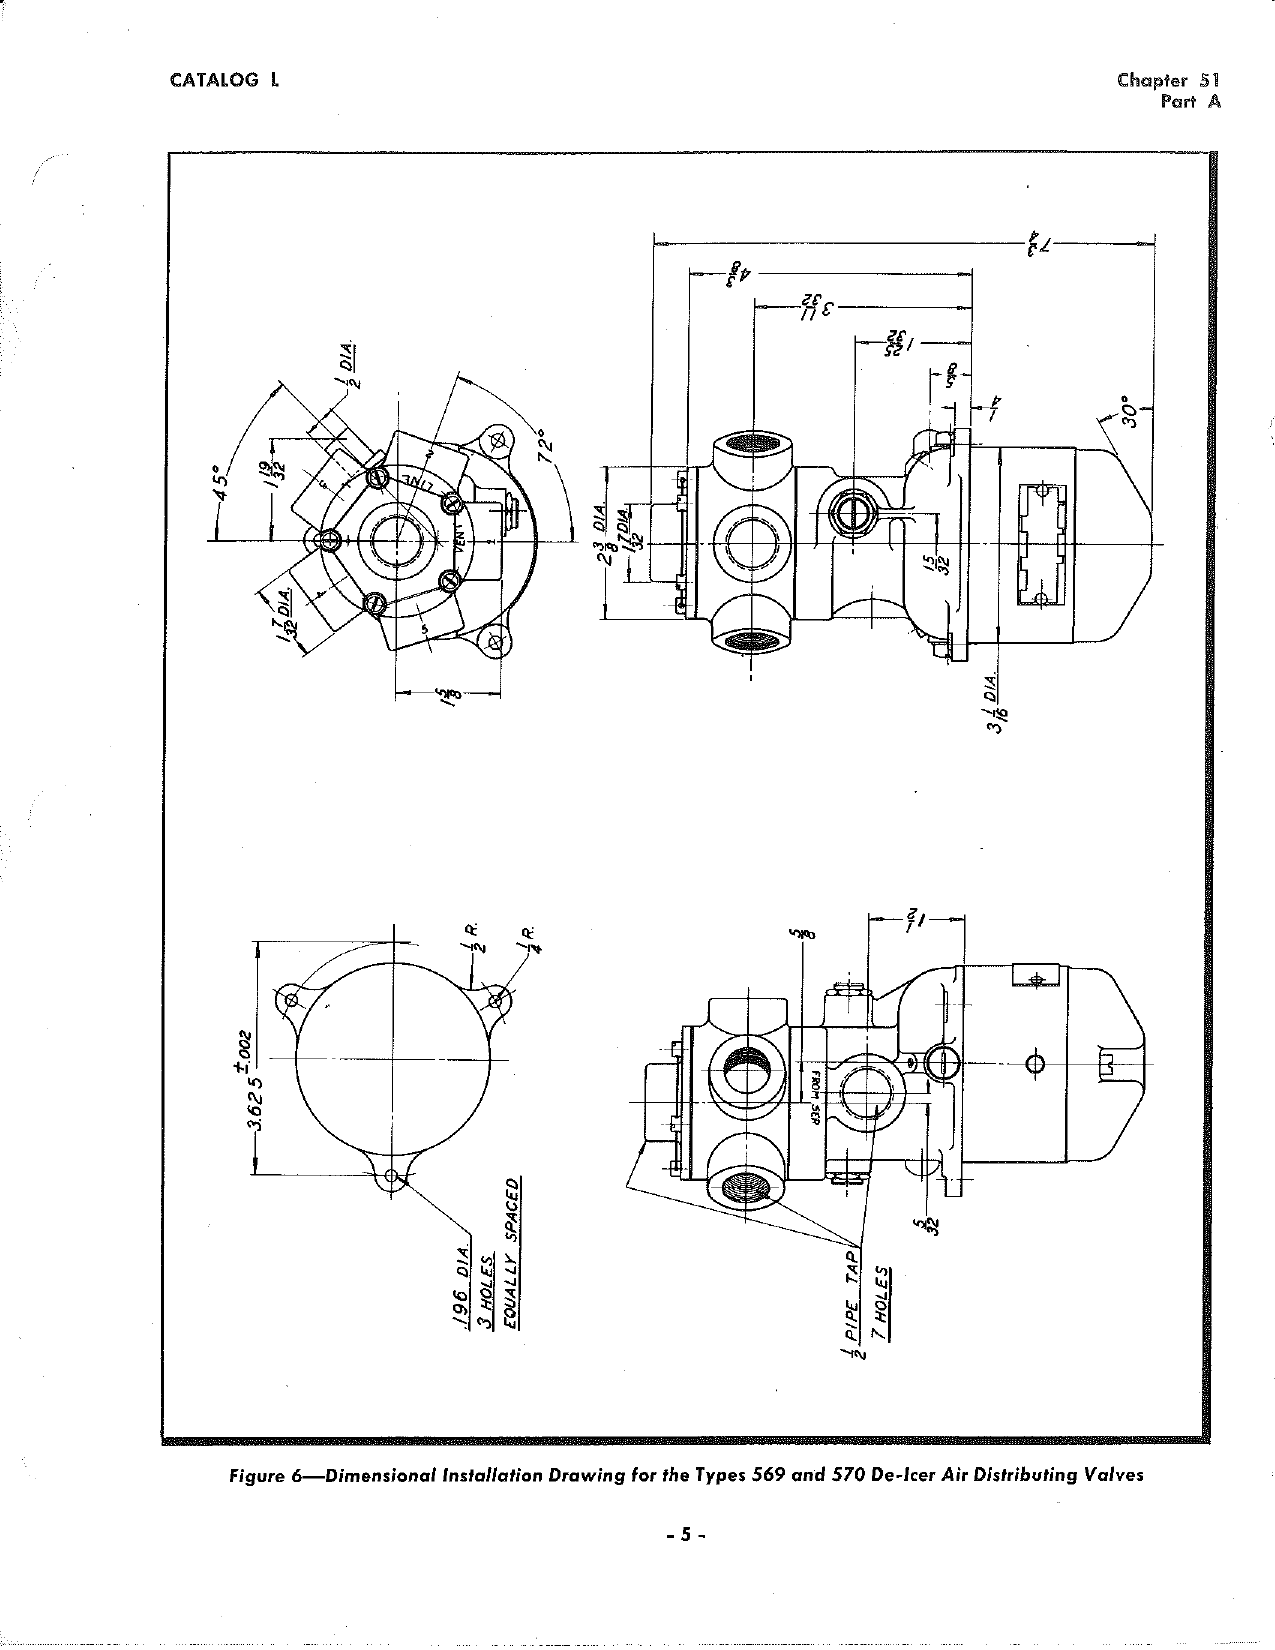 Sample page 5 from AirCorps Library document: Operating and Service Instructions for De-Icer Air Distributing Valves and 4-Way Control Valves